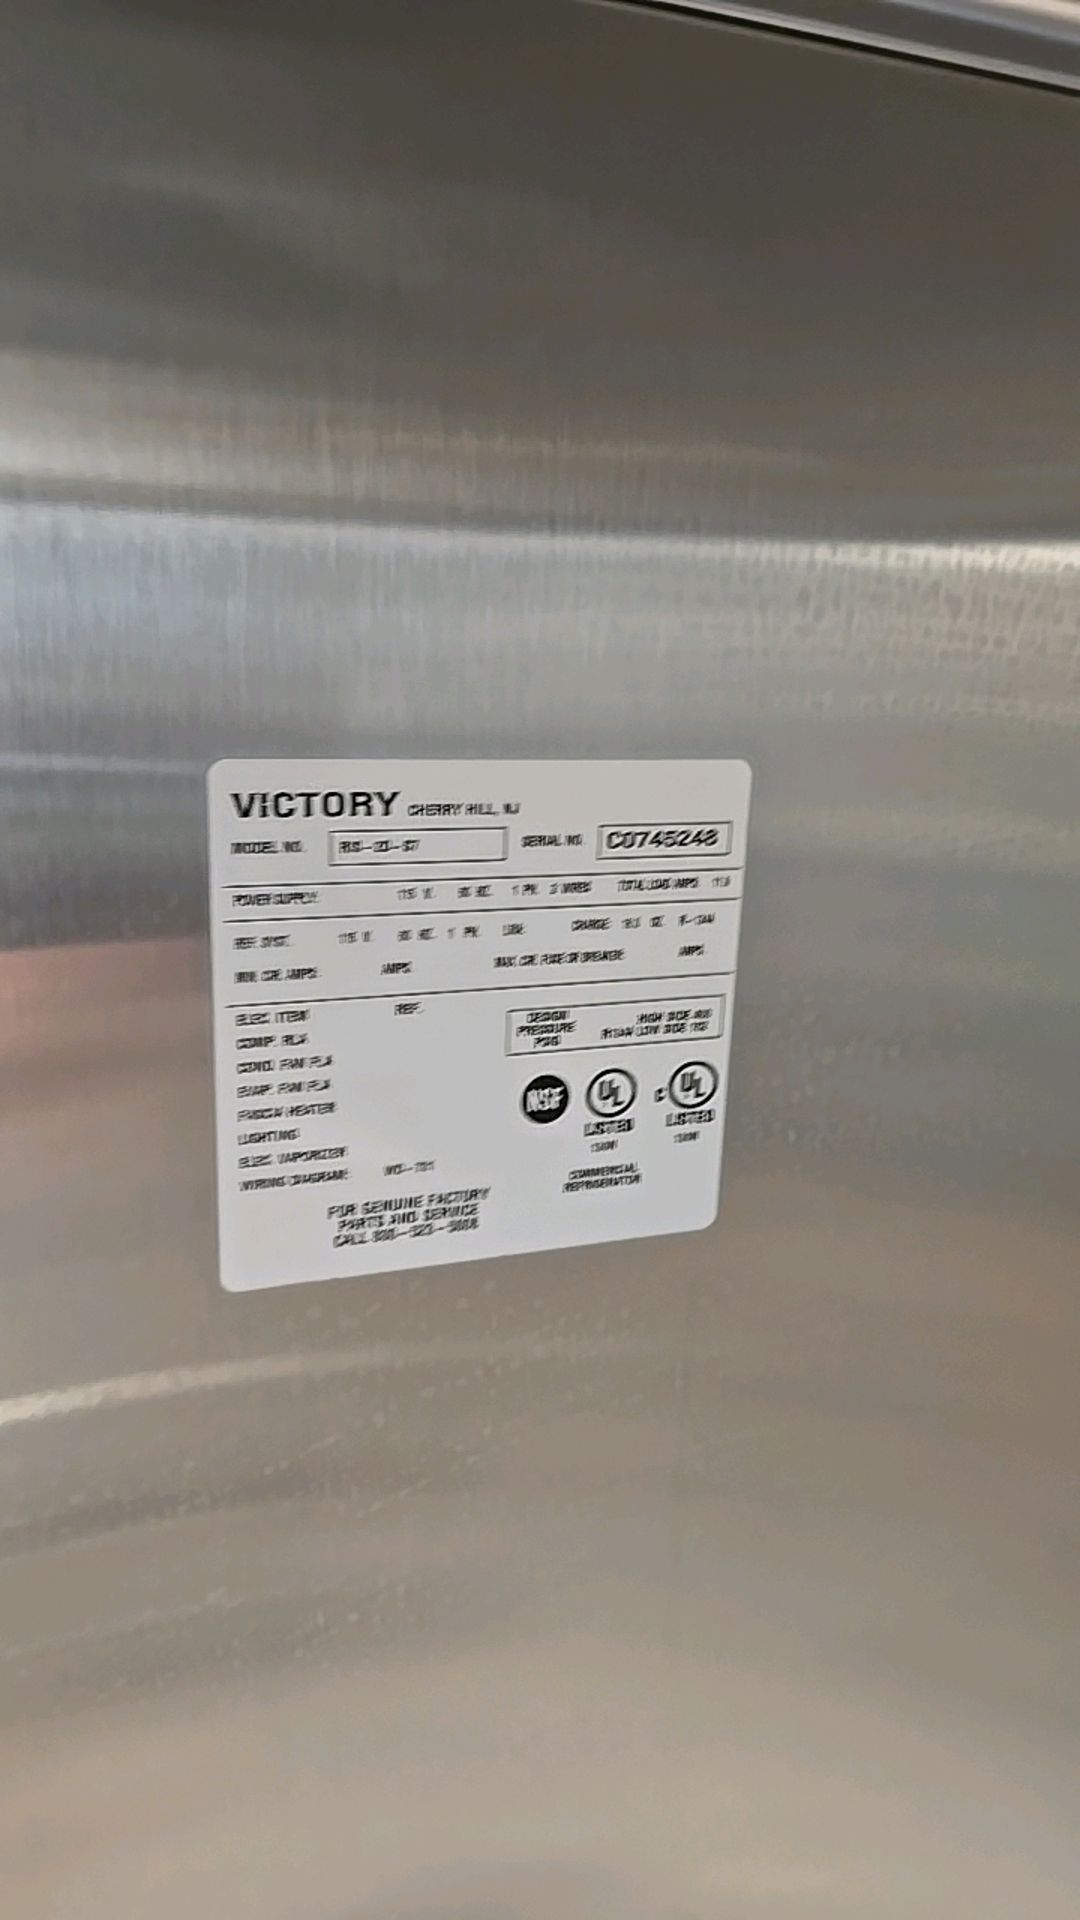 VICTORY RIS-2D-S7 ONE-SECTION, TWO-DOOR REFRIGERATOR - Image 7 of 7